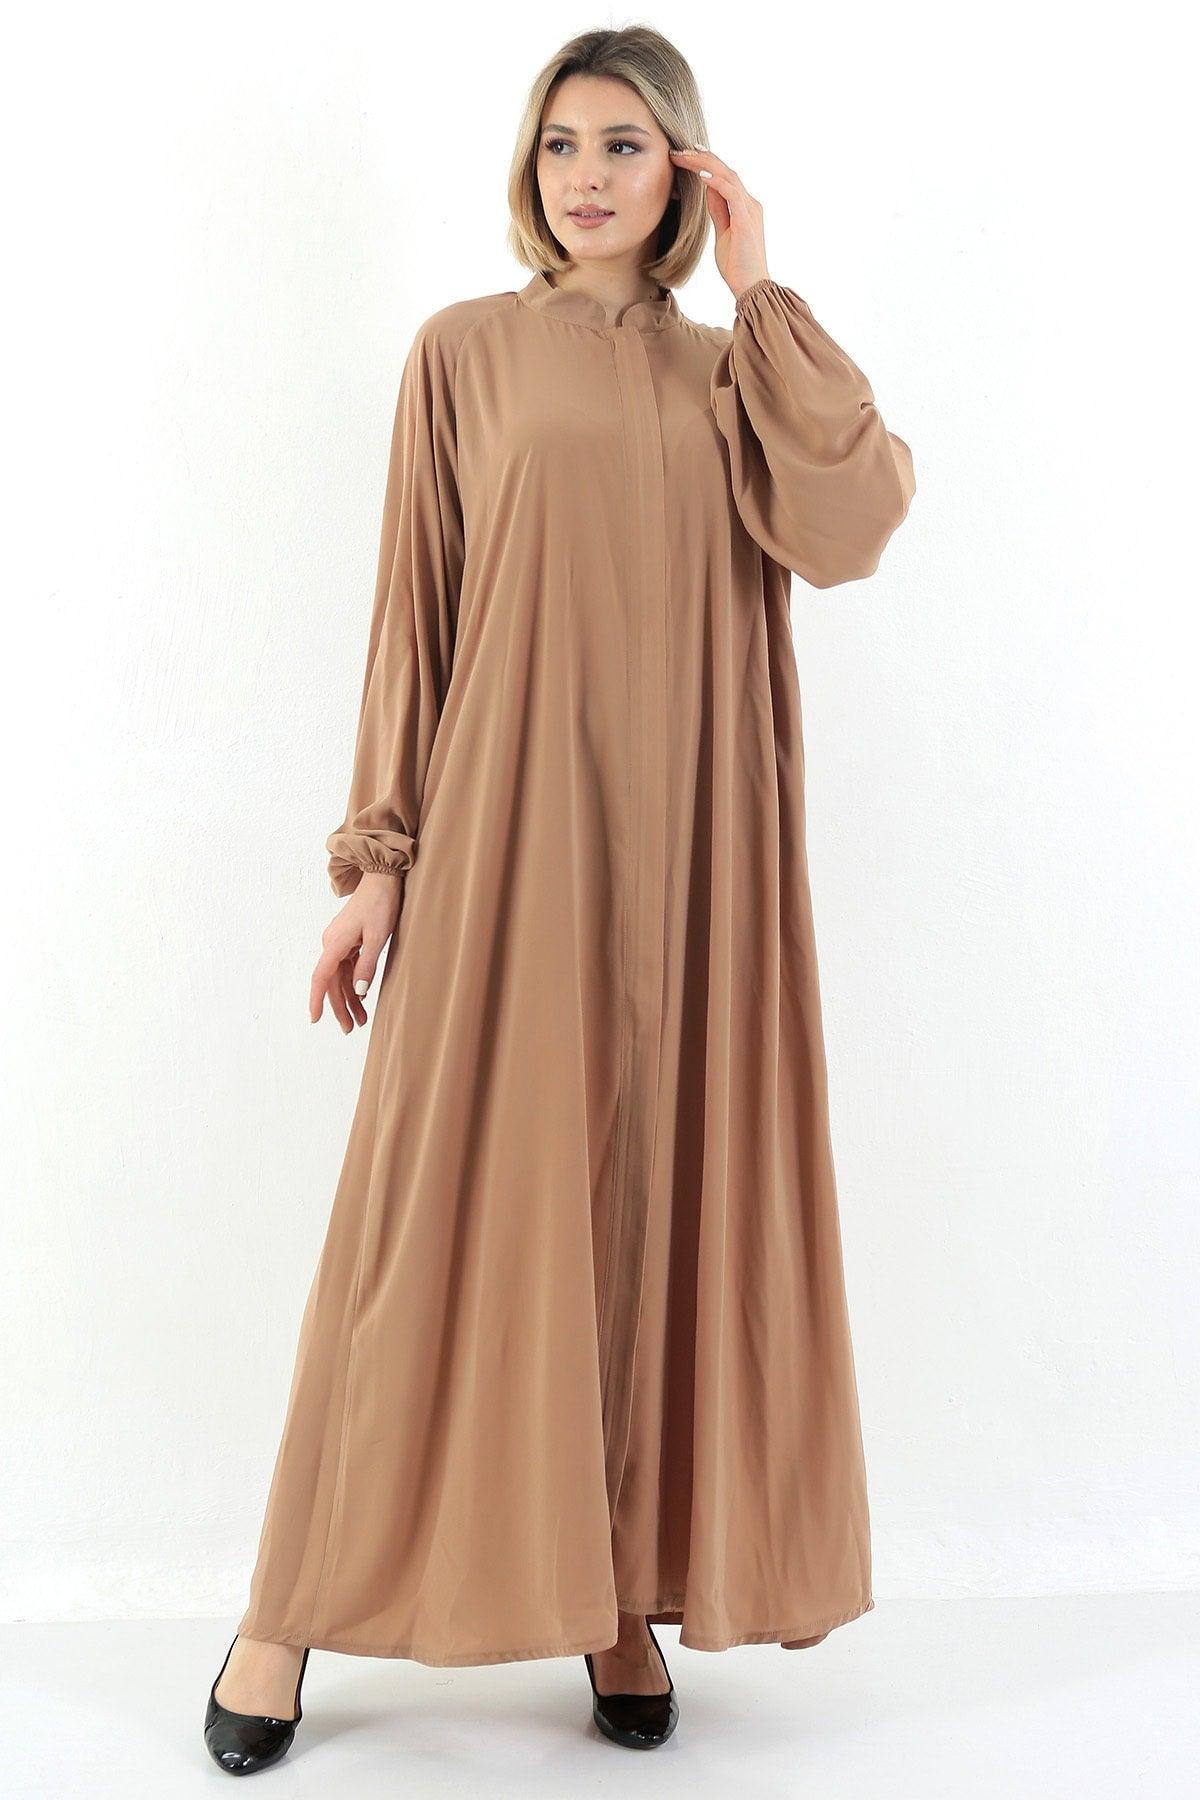 Almond Patties Zippered Belted Abaya Hijab With Pockets - Swordslife